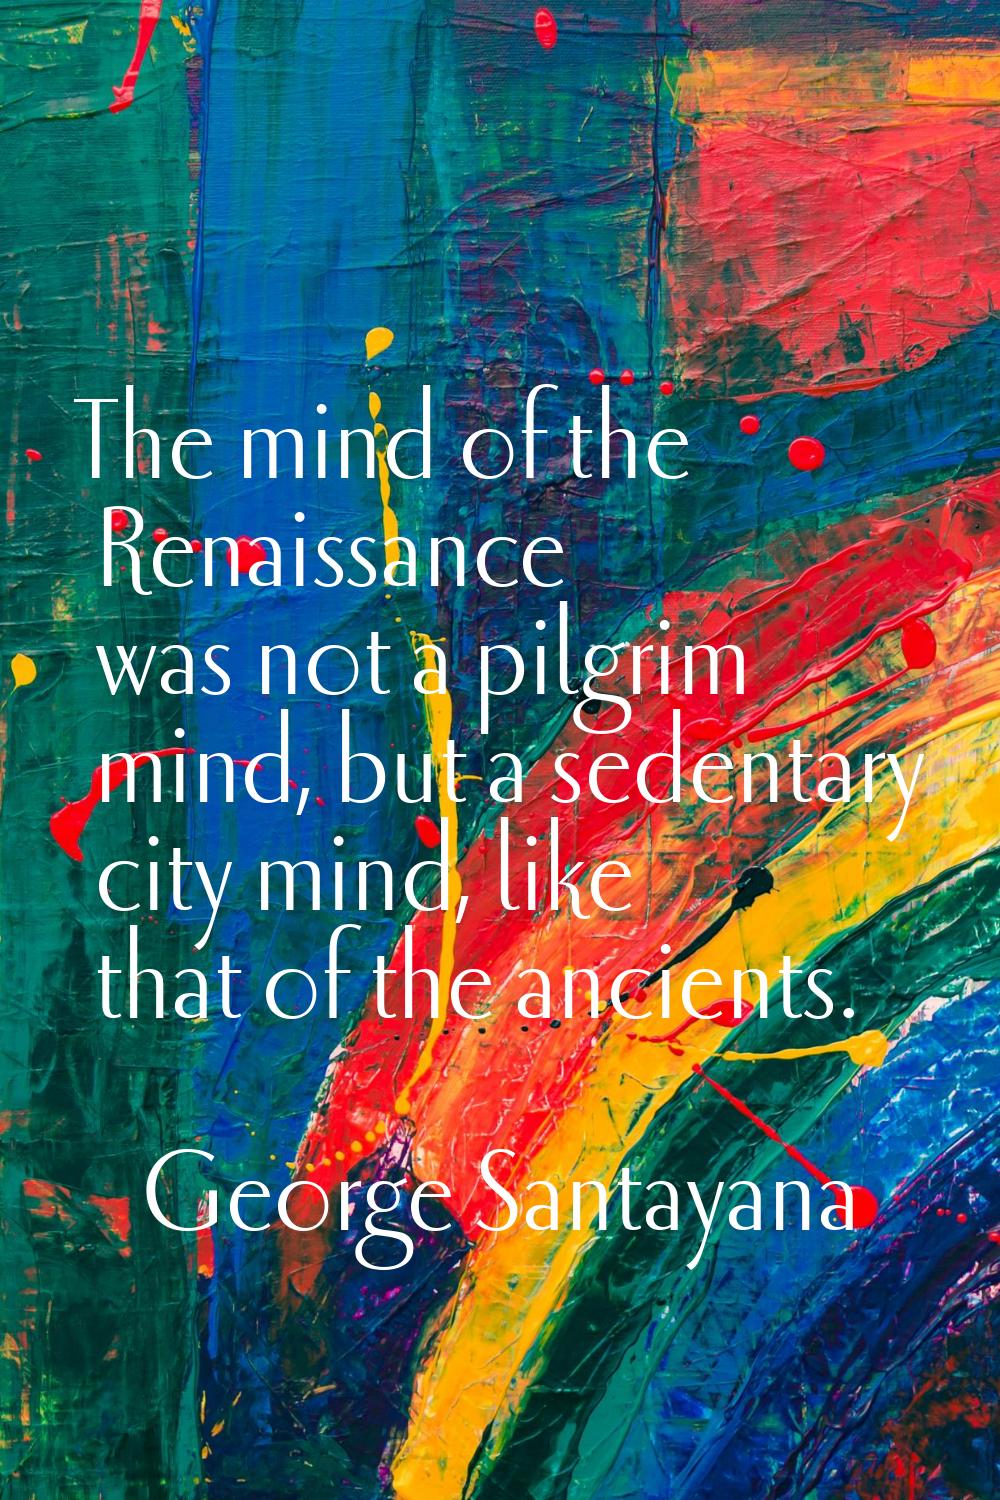 The mind of the Renaissance was not a pilgrim mind, but a sedentary city mind, like that of the anc